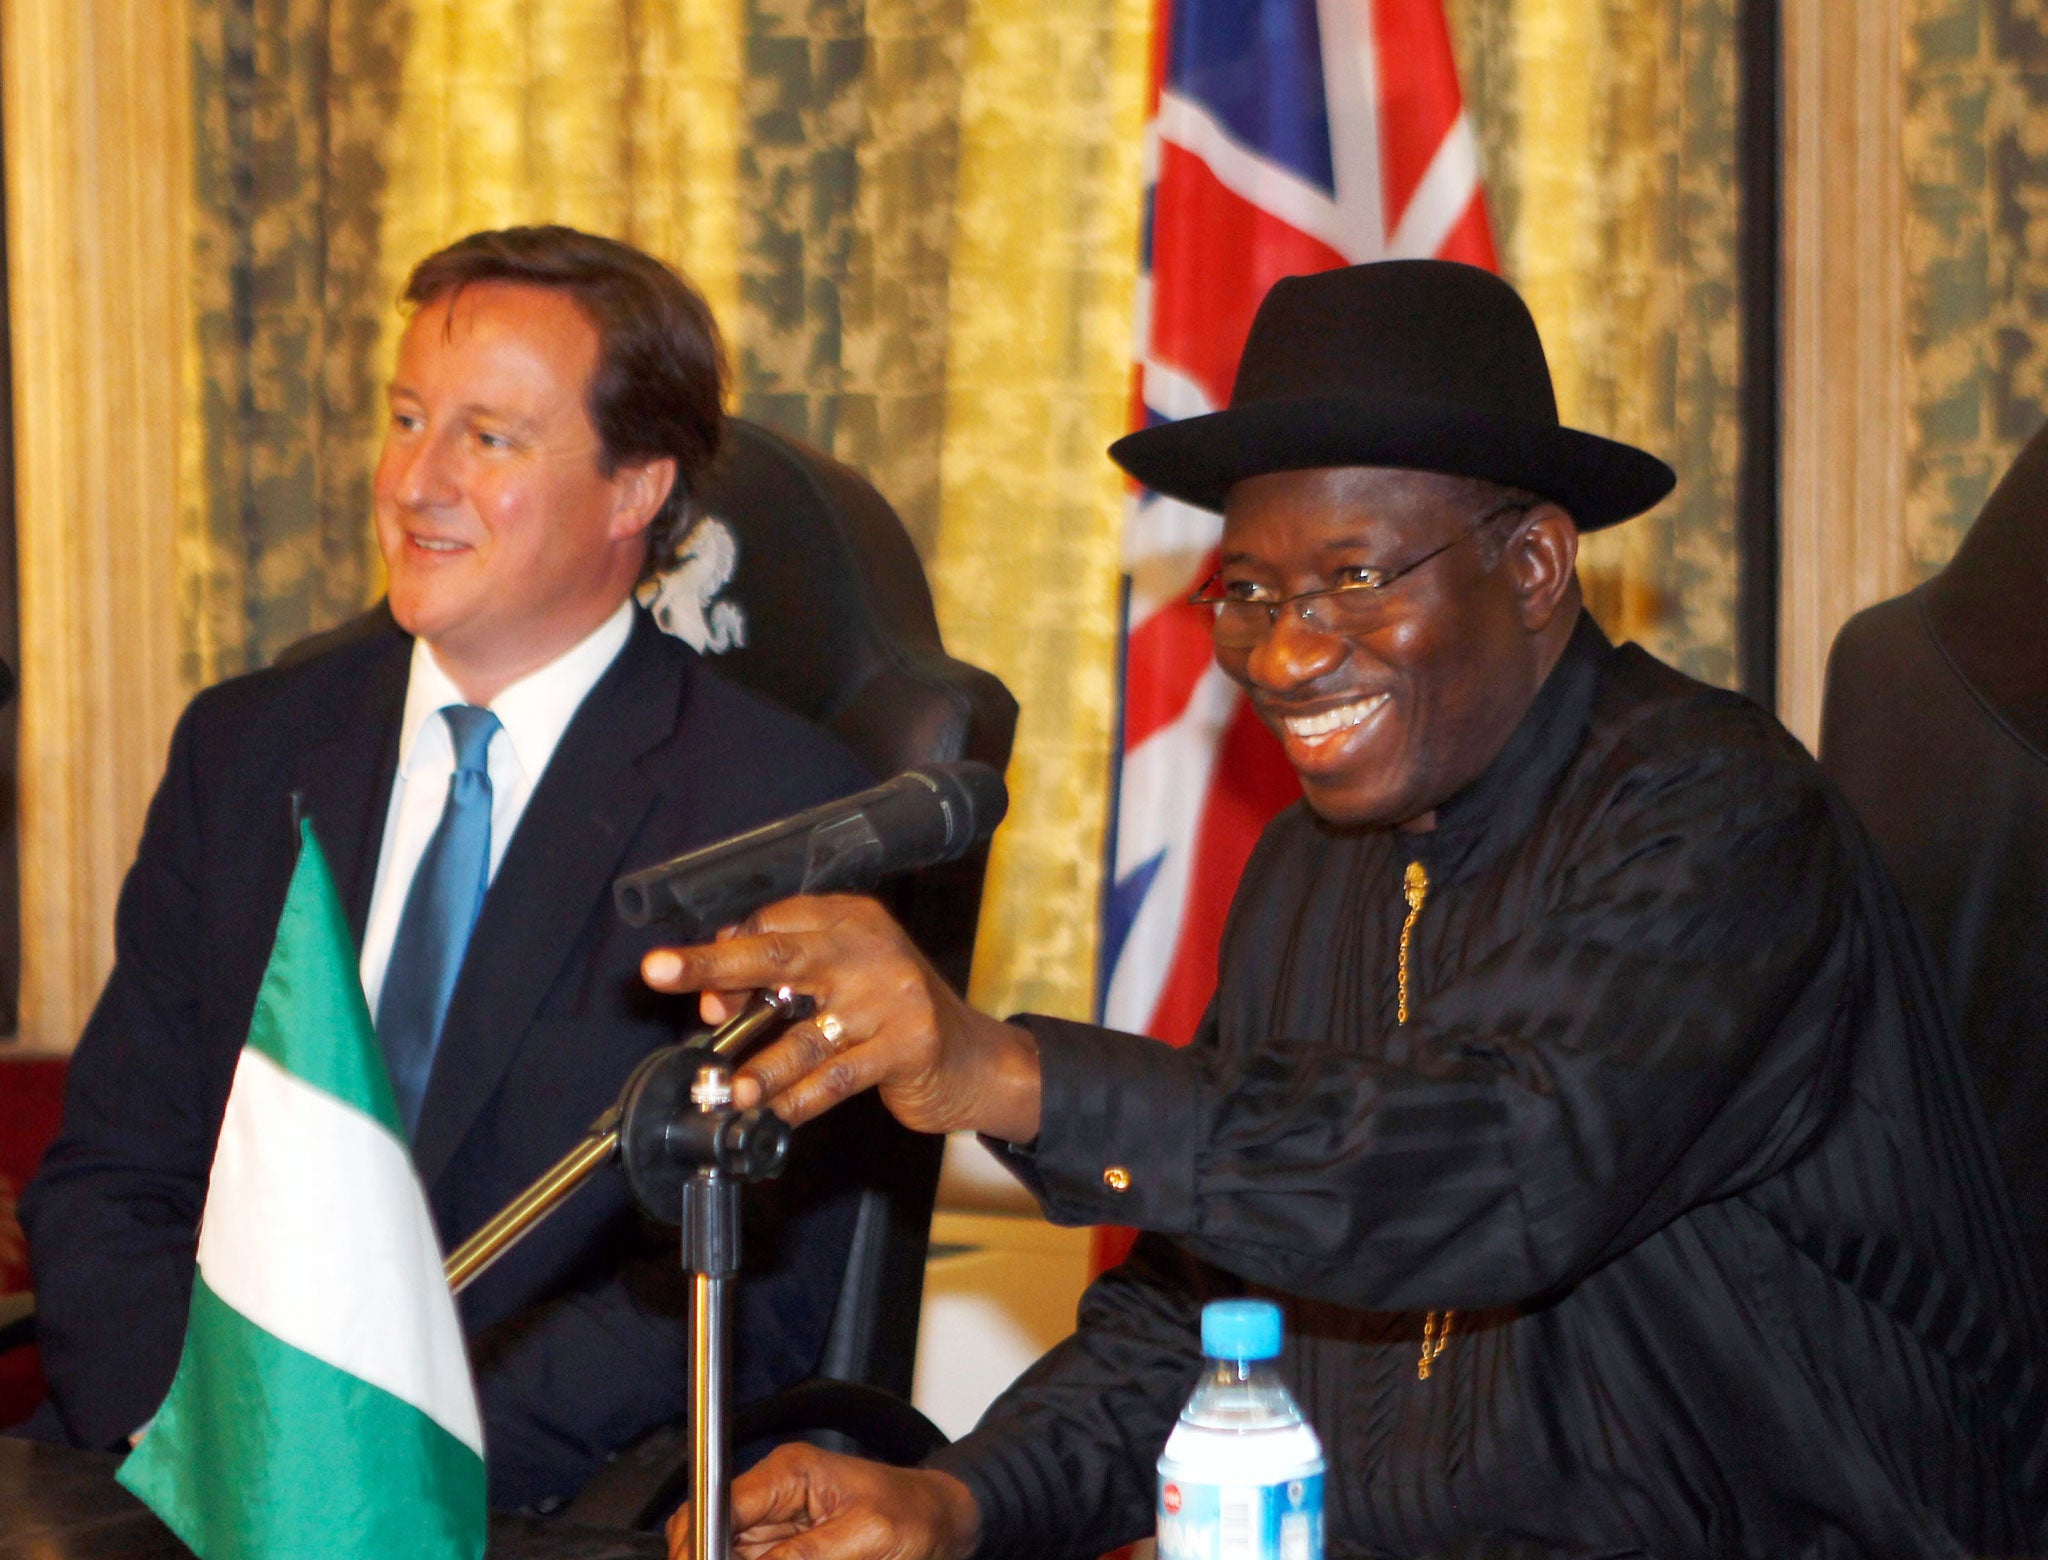 British Prime Minister David Cameron and Nigerian President Goodluck Jonathan take part in round table talks in Nigeria during July 2011